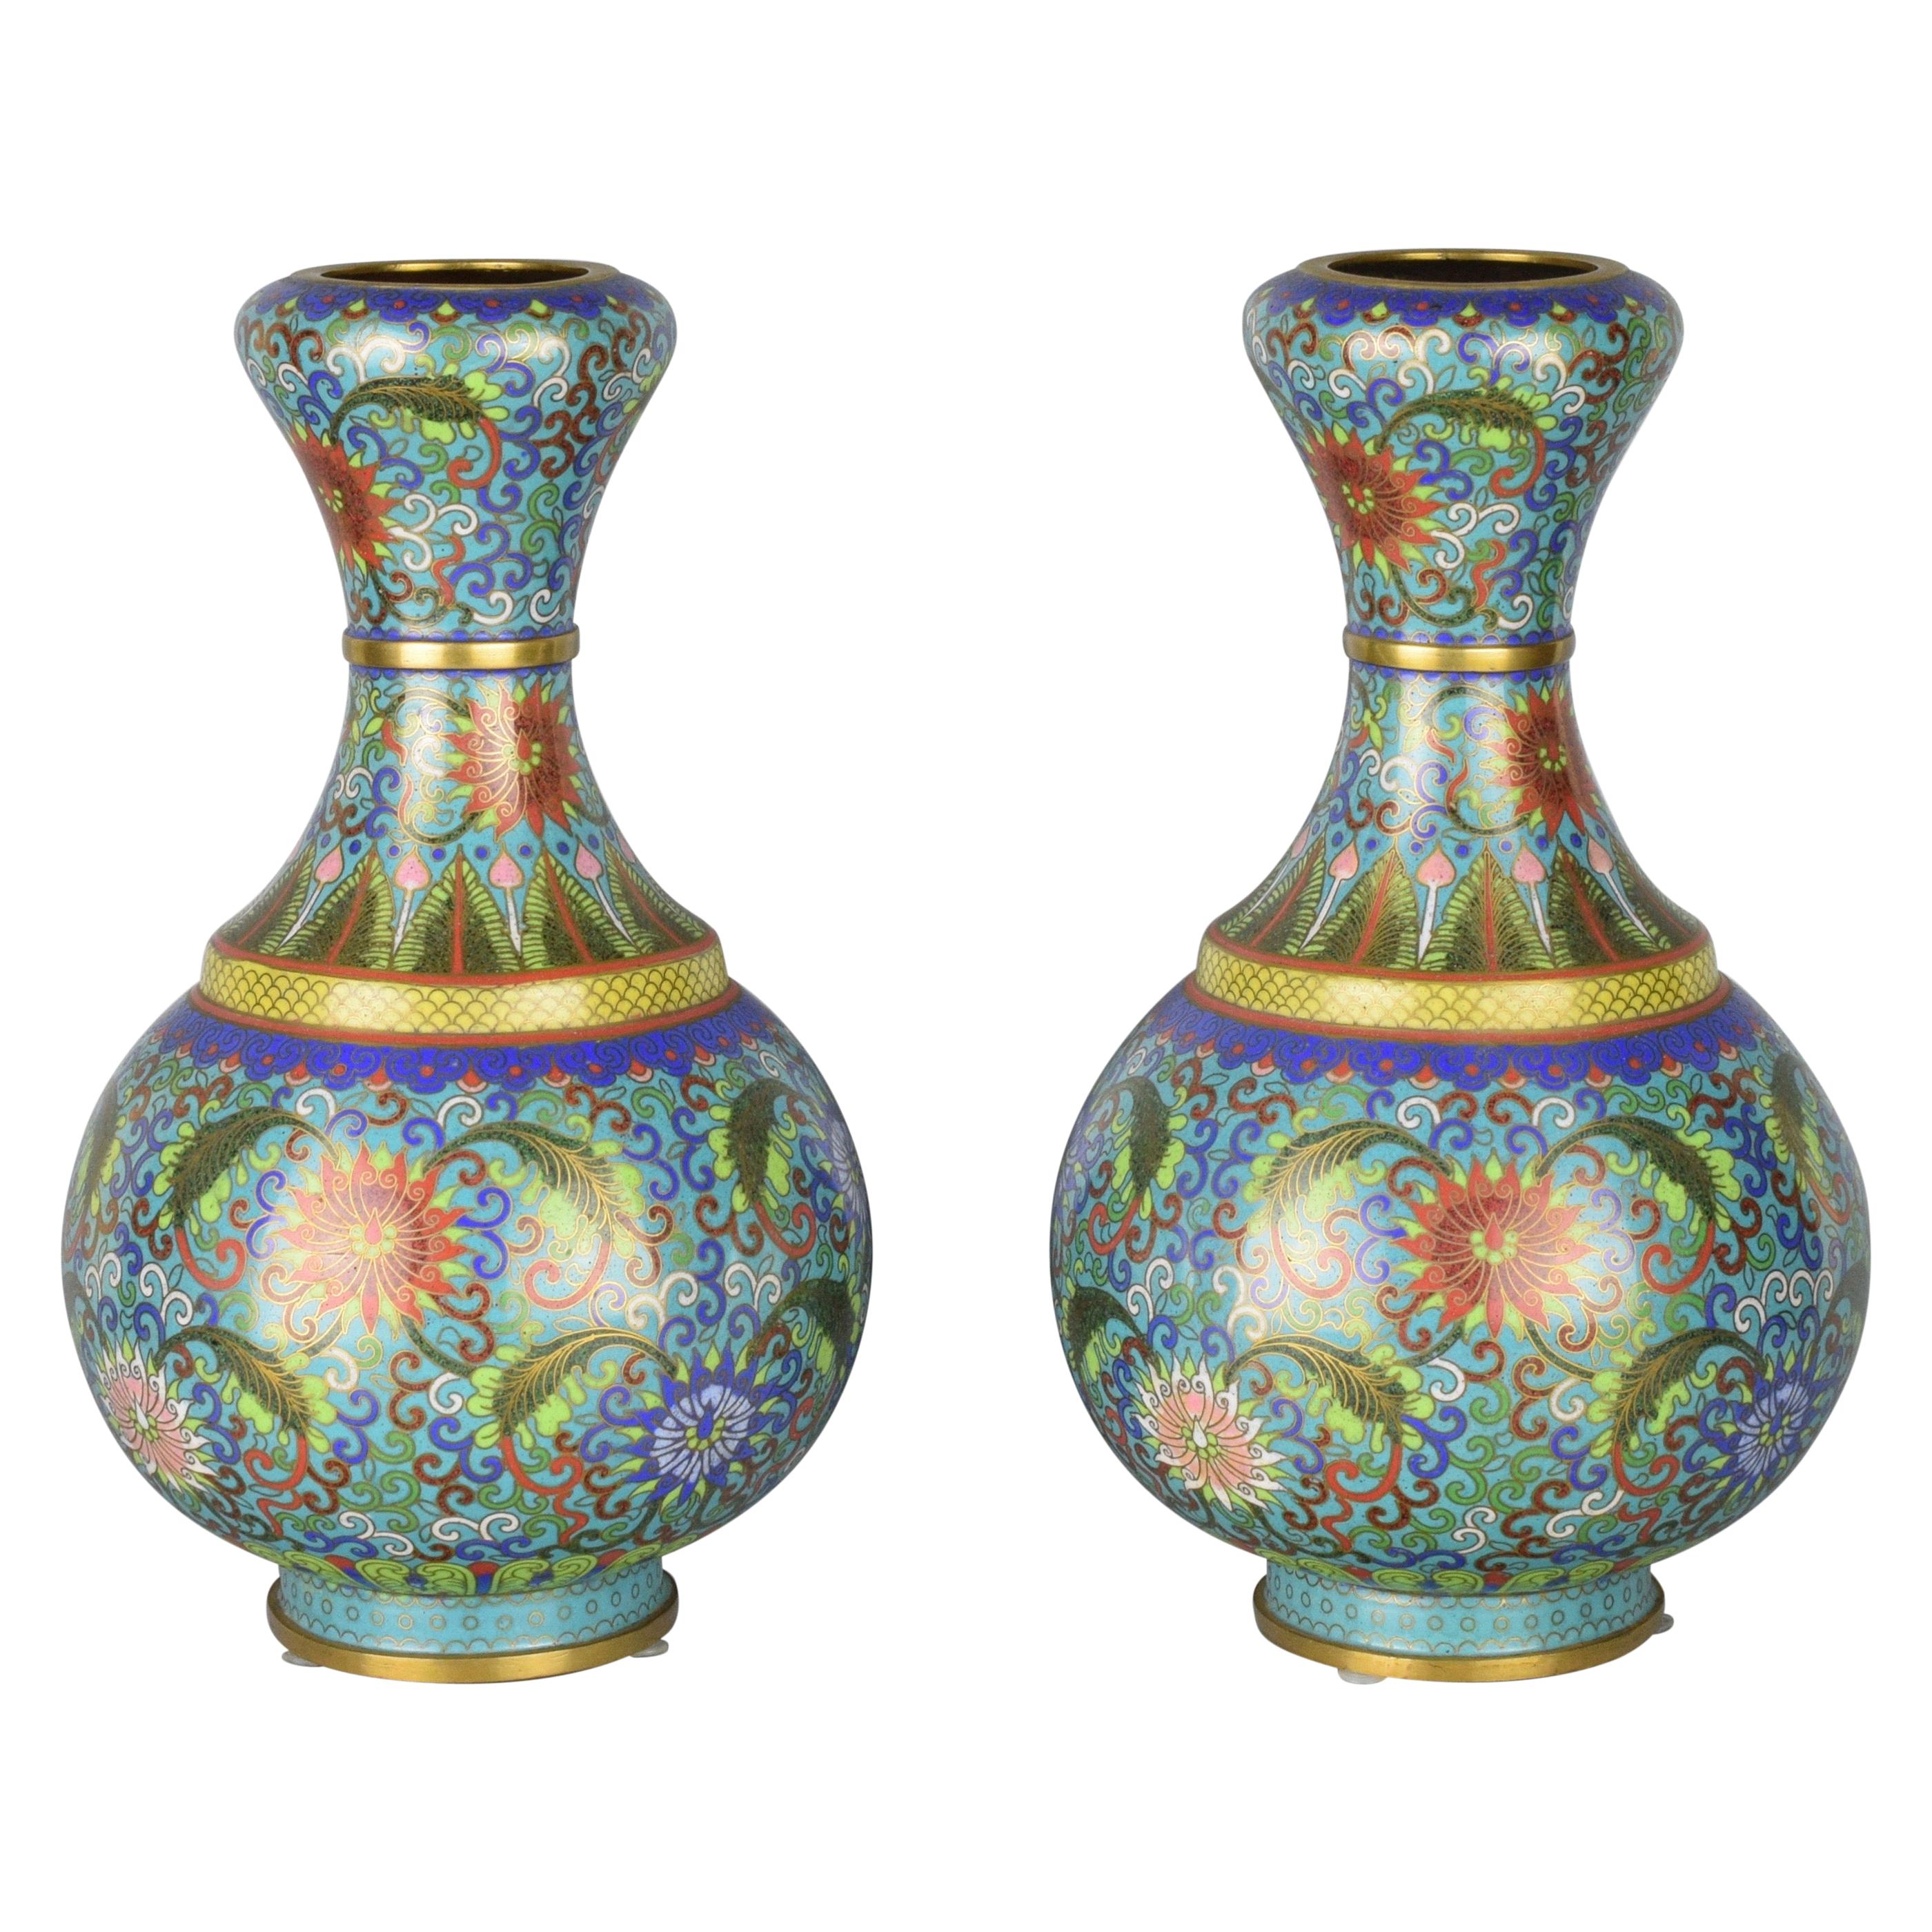 Pair of Chinese Blue Cloisonné Vases, Enamelled and Gilded, Early 20th Century